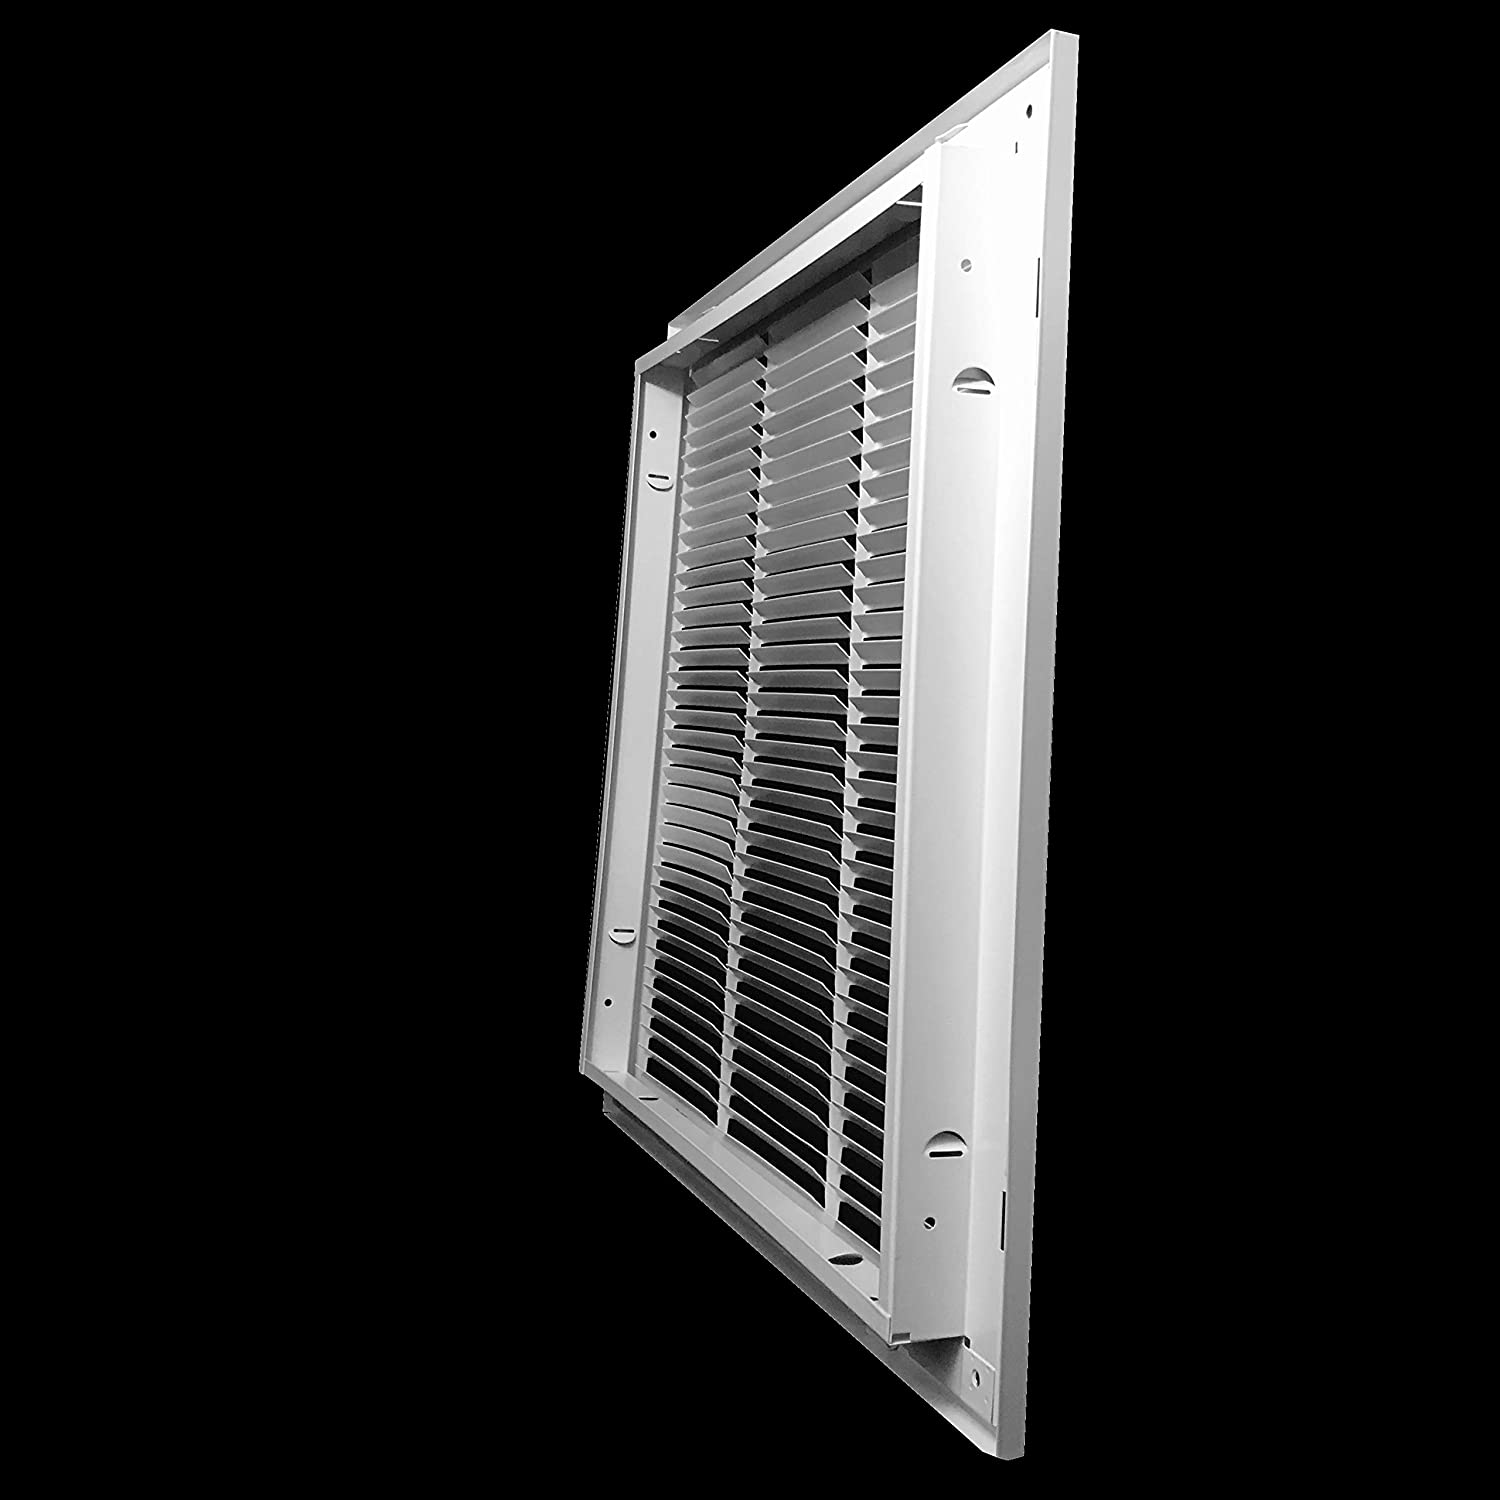 20" X 12" Duct Opening | Filter Included HD Steel Return Air Filter Grille for Sidewall and Ceiling